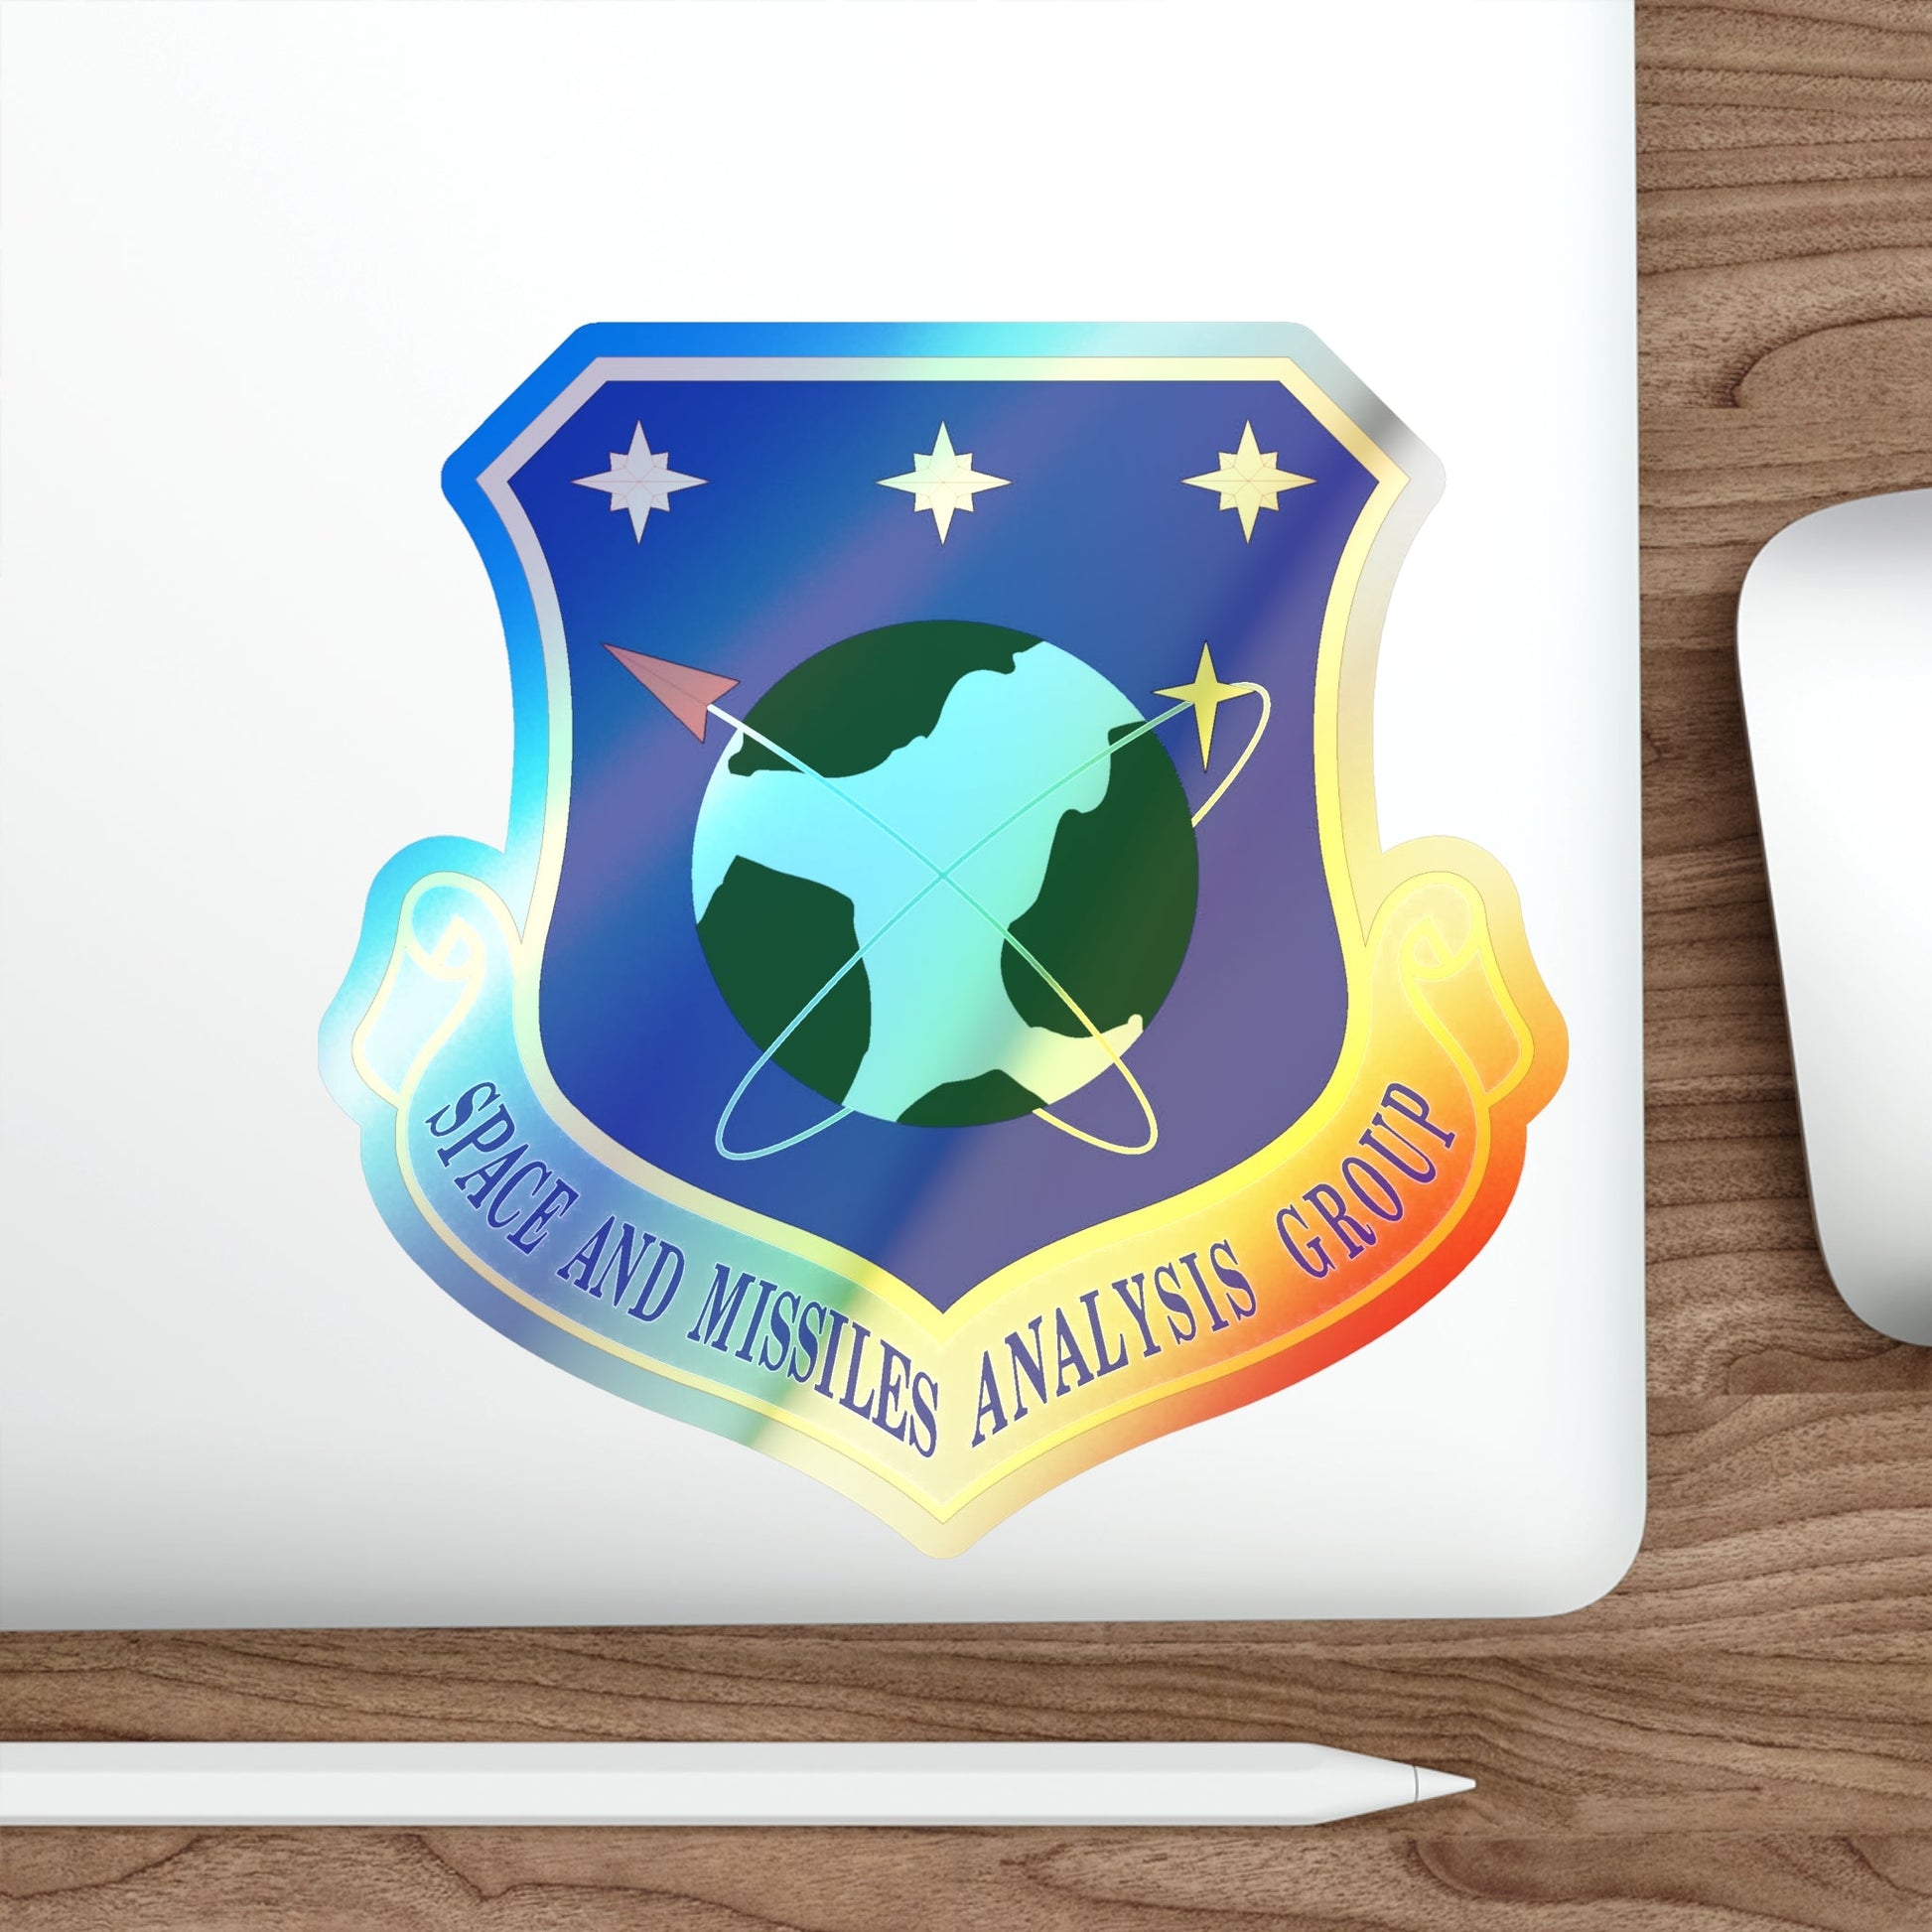 Space and Missiles Analysis Group (U.S. Air Force) Holographic STICKER Die-Cut Vinyl Decal-The Sticker Space